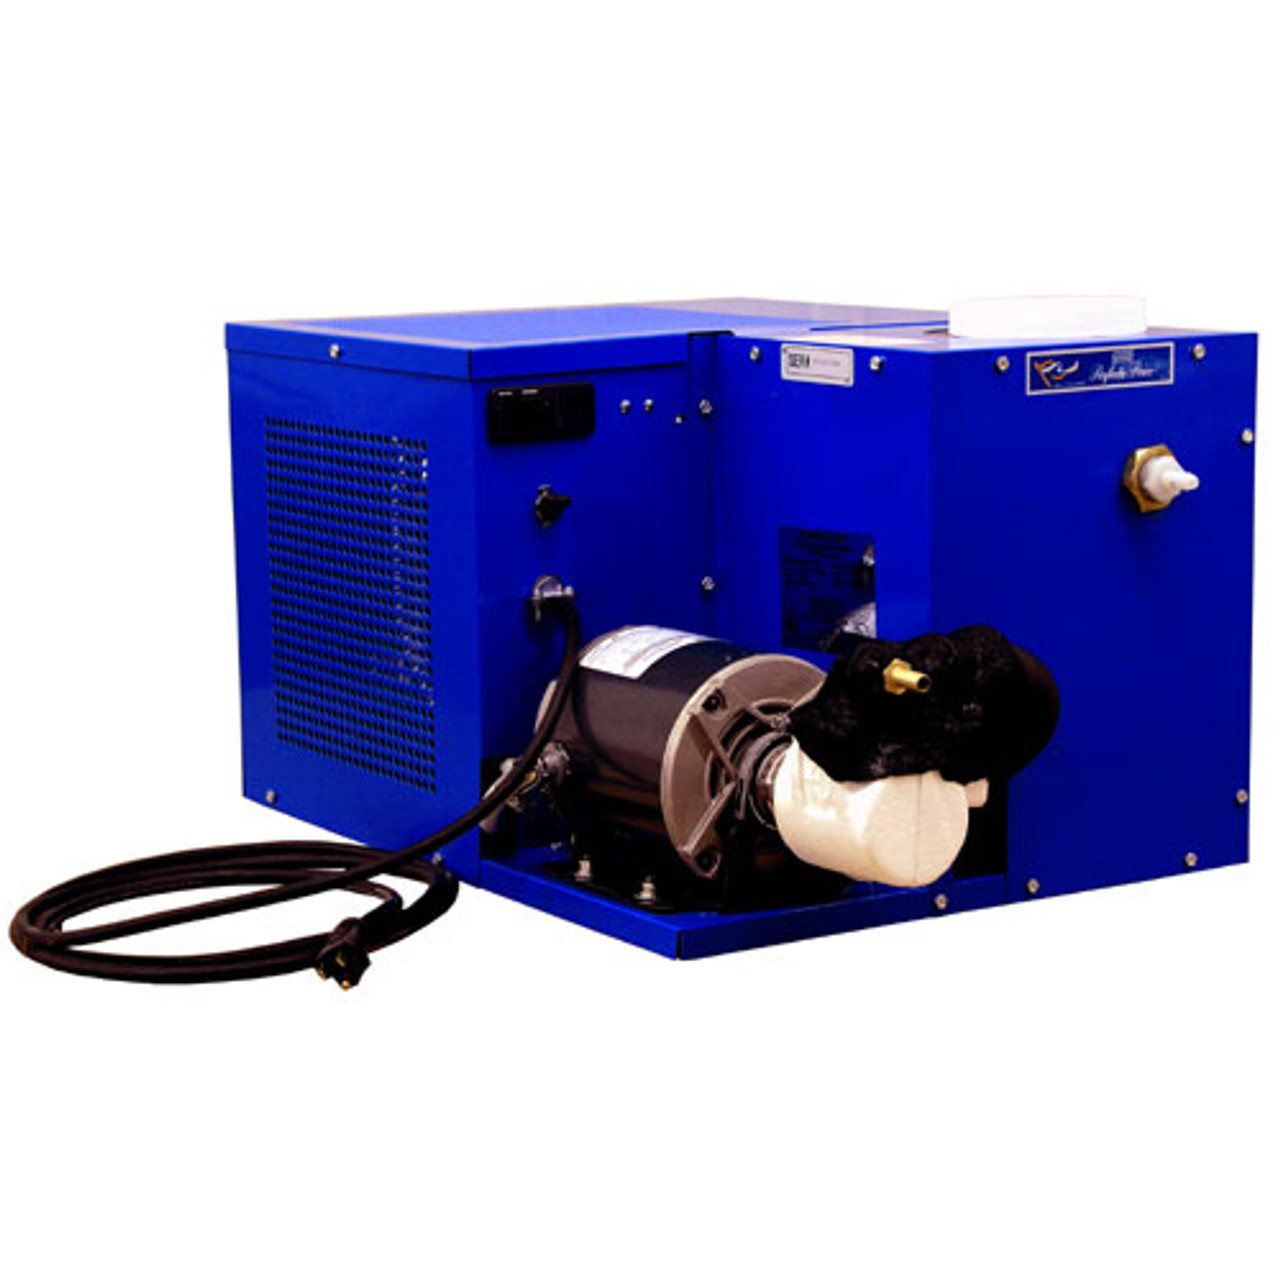 Glycol Chiller - 1/3 HP - 125 ft. - 1 Pump